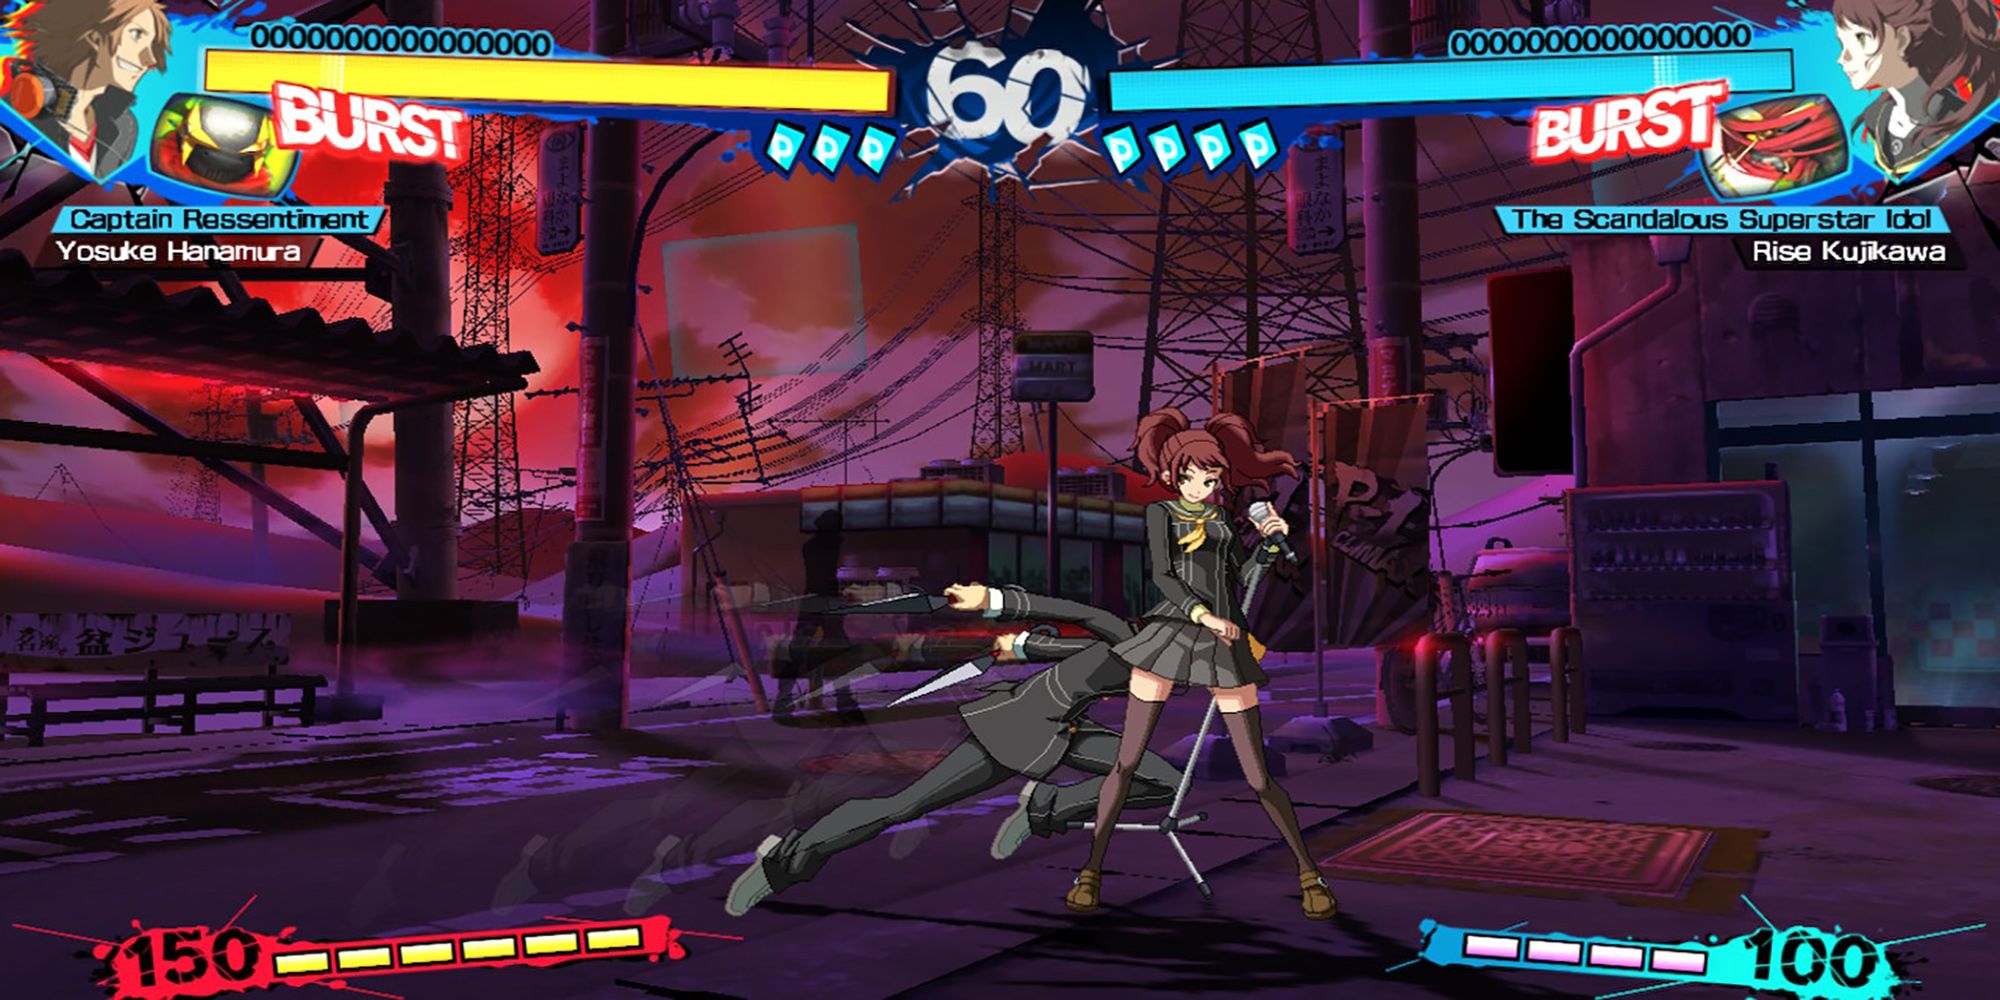 Yosuke ground dodges towards Rise in a battle in Inaba. Persona 4 Arena Ultimax.